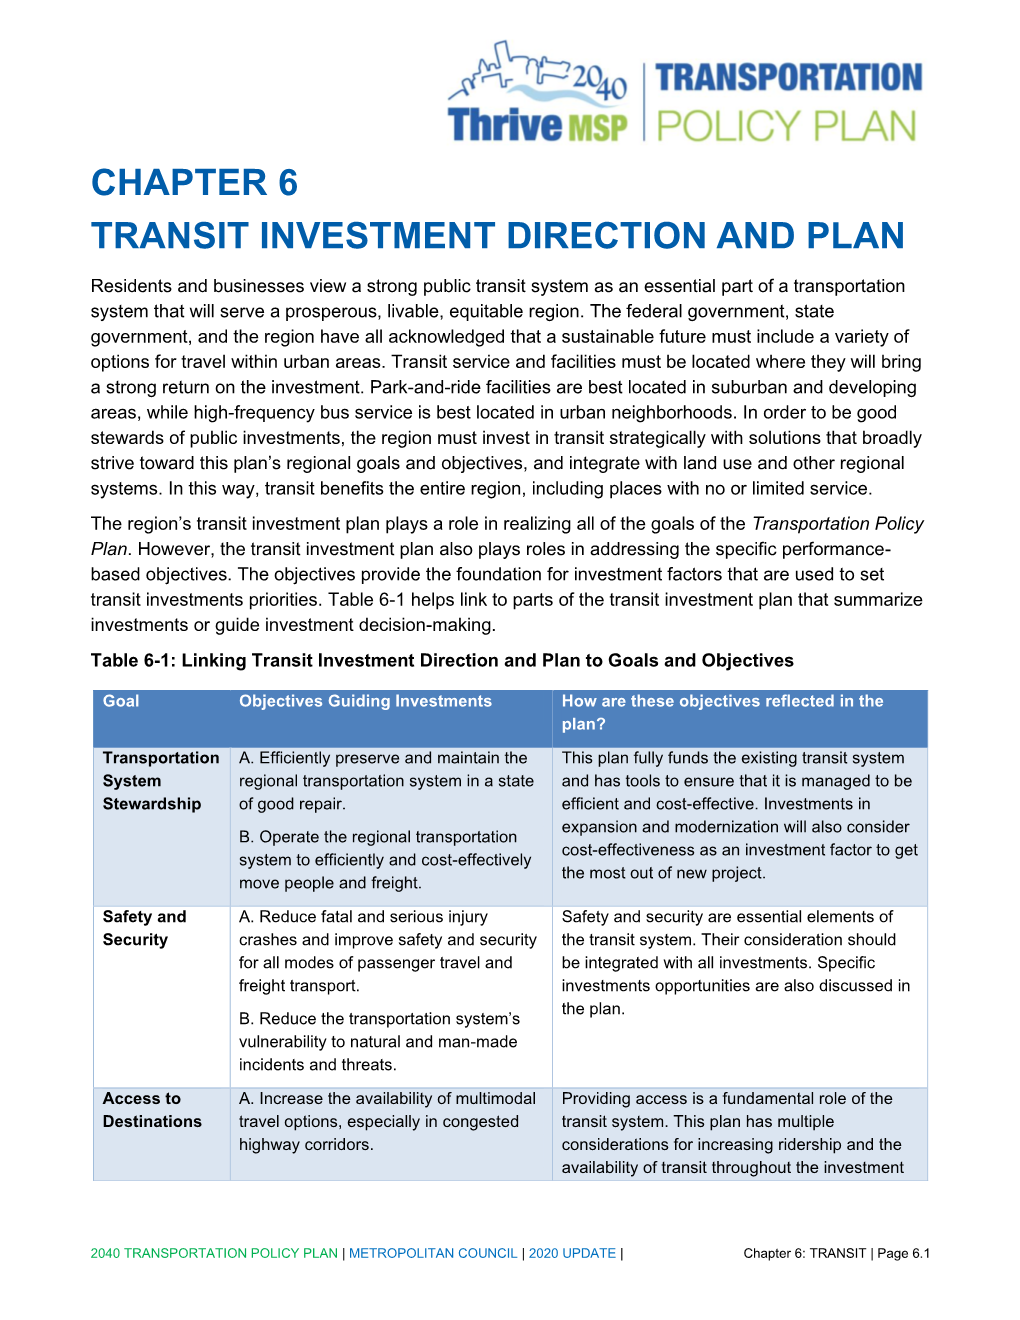 Chapter 6 Transit Investment Direction and Plan